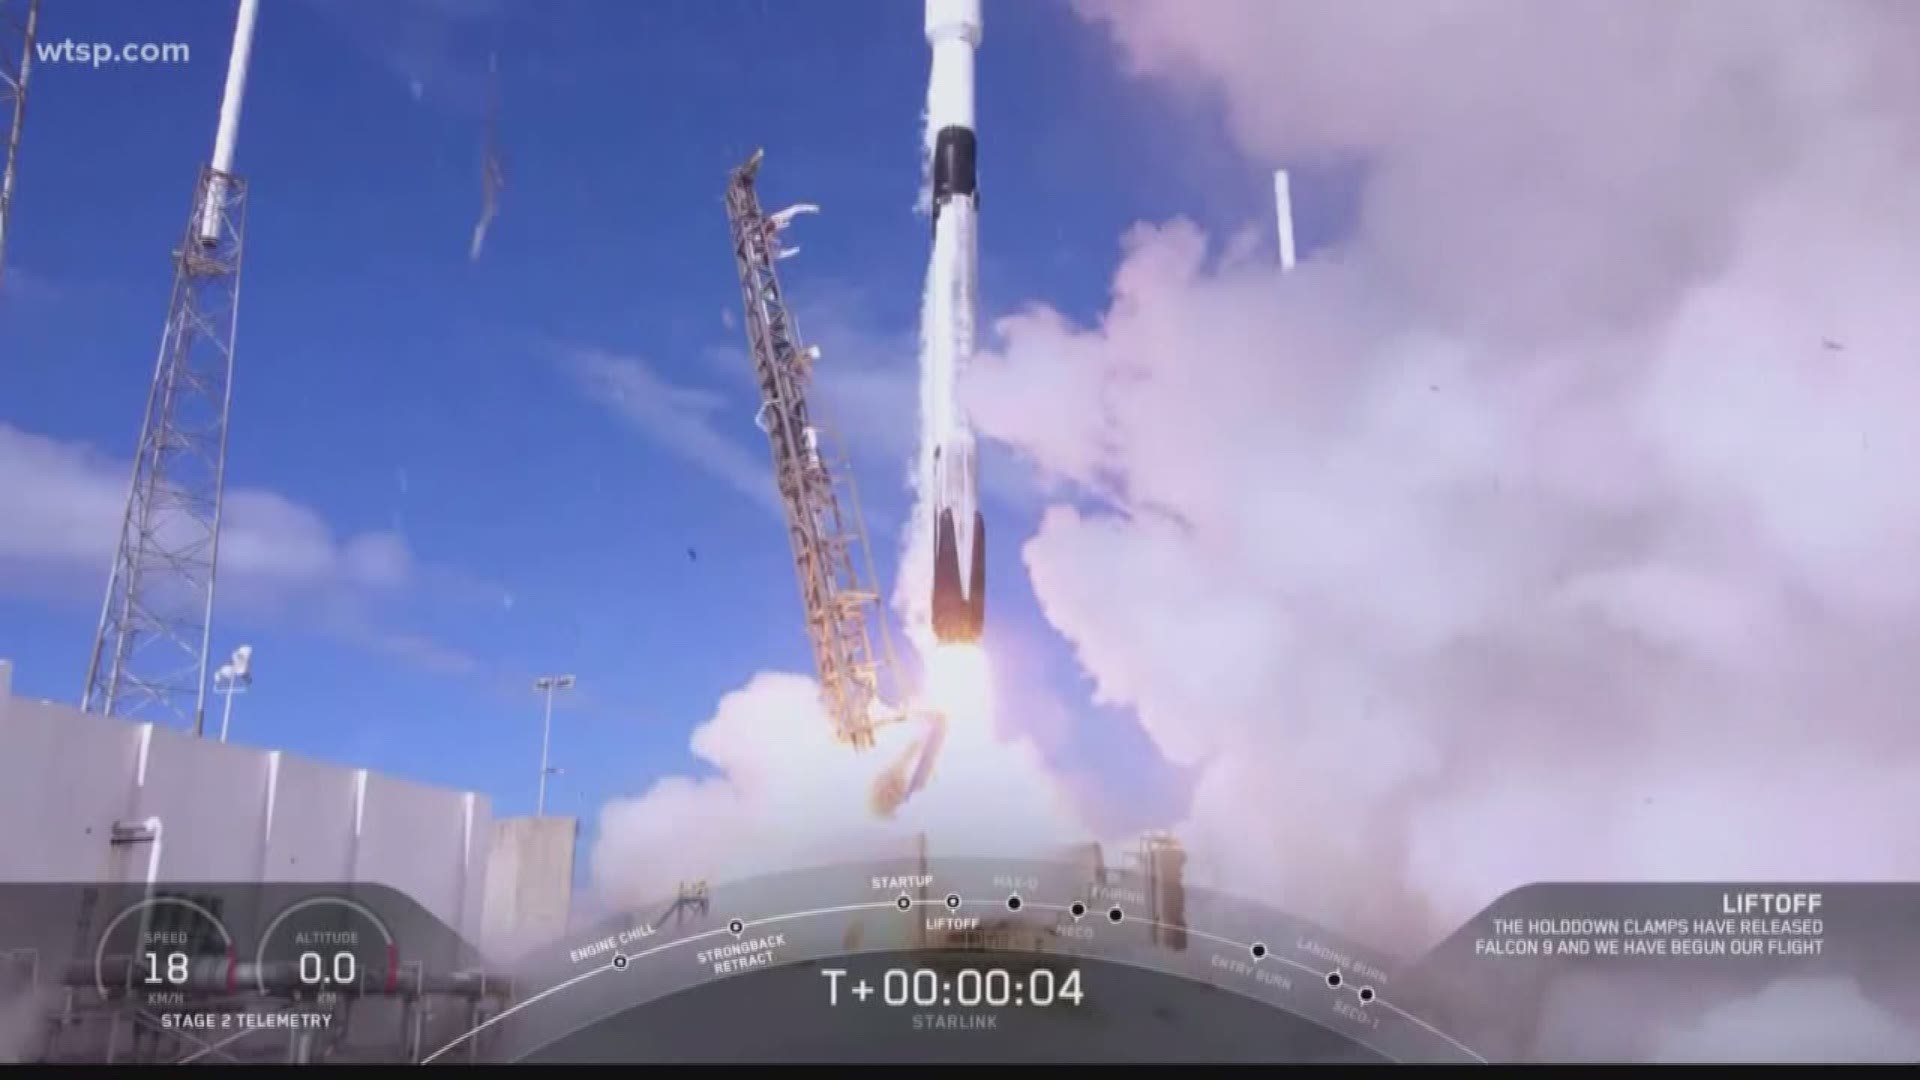 Blastoff went smoothly at Cape Canaveral. This is the 60th communication launched by the private space company as part of its Starlink constellation.